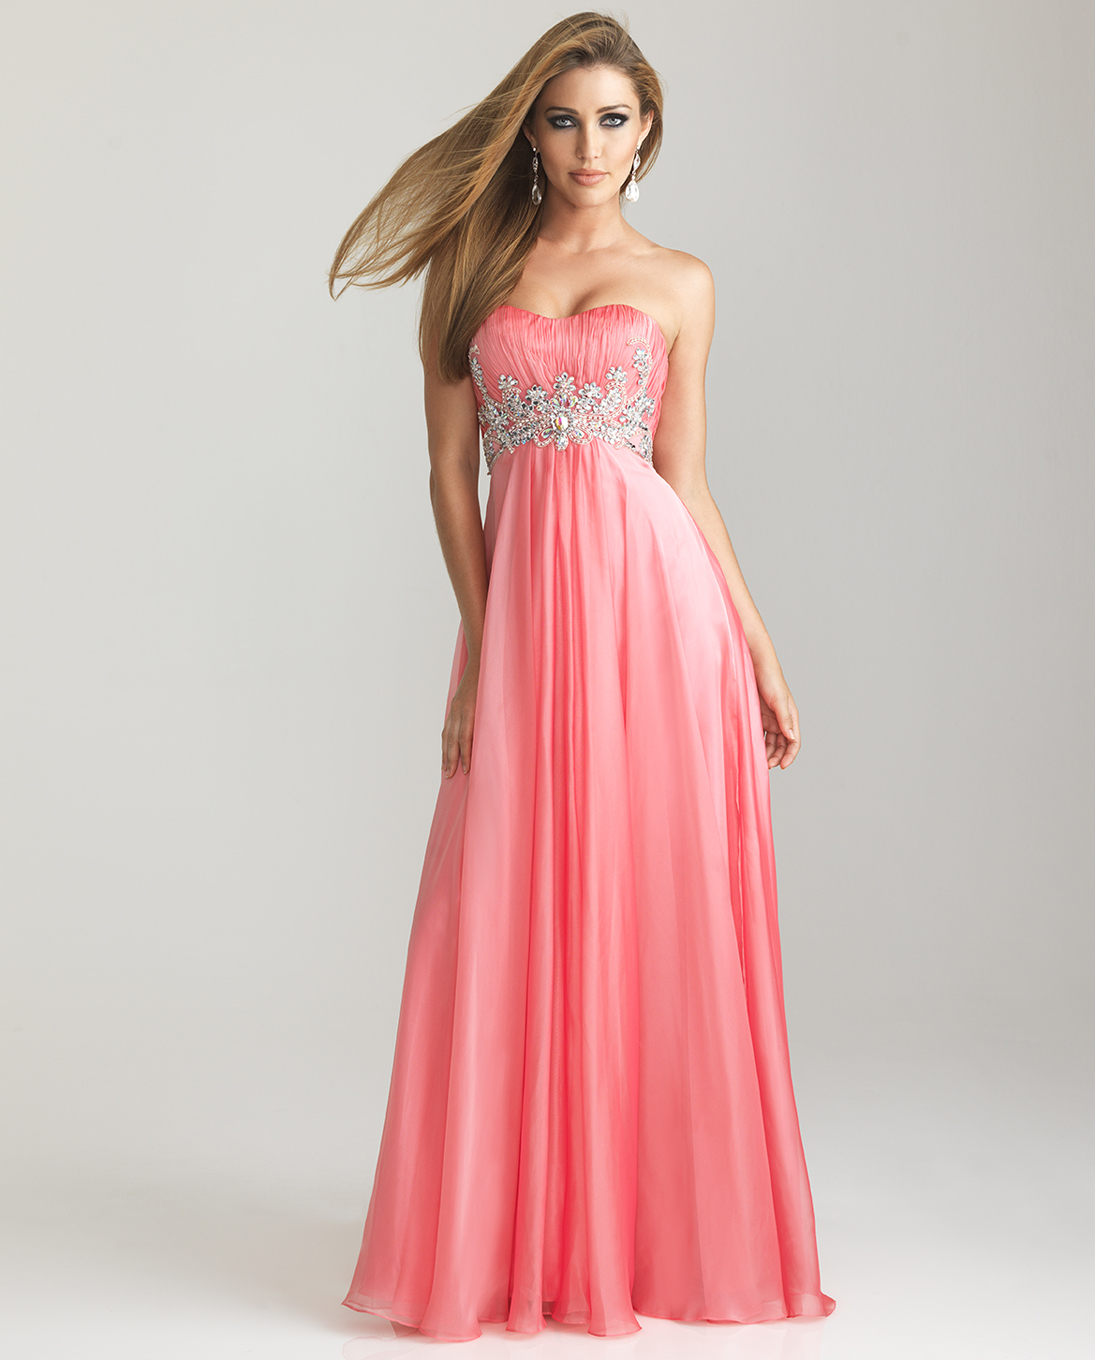 strapless wedding dresses with pink Blog of Wedding and Occasion Wear